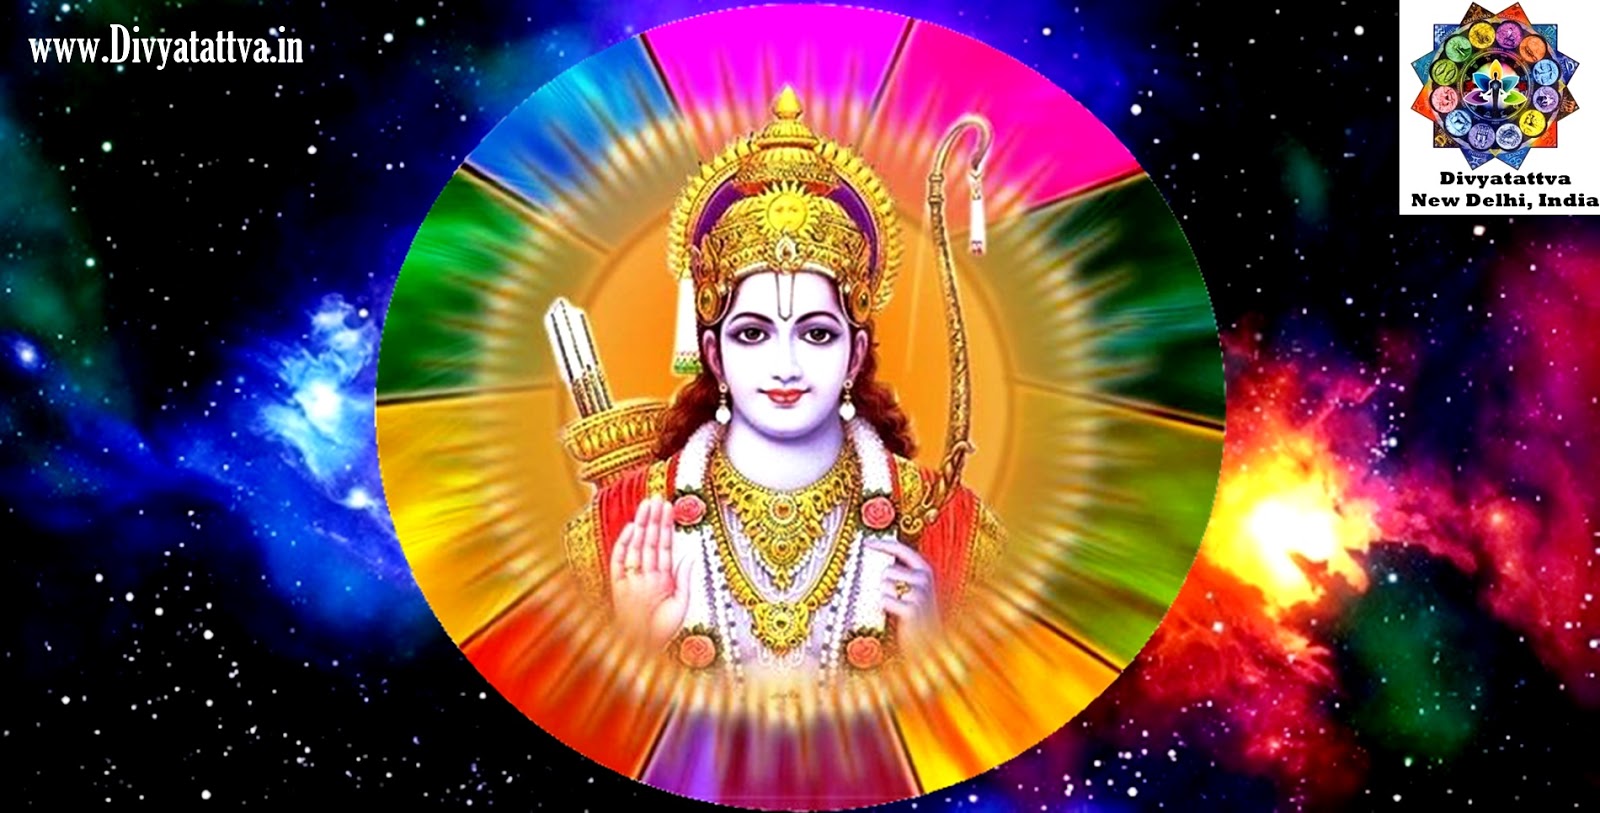 Divyatattva Astrology Free Horoscopes Psychic Tarot Yoga Tantra Occult Images Videos Lord Rama Hd Wallpaper Free Download Indian God Images Full Size